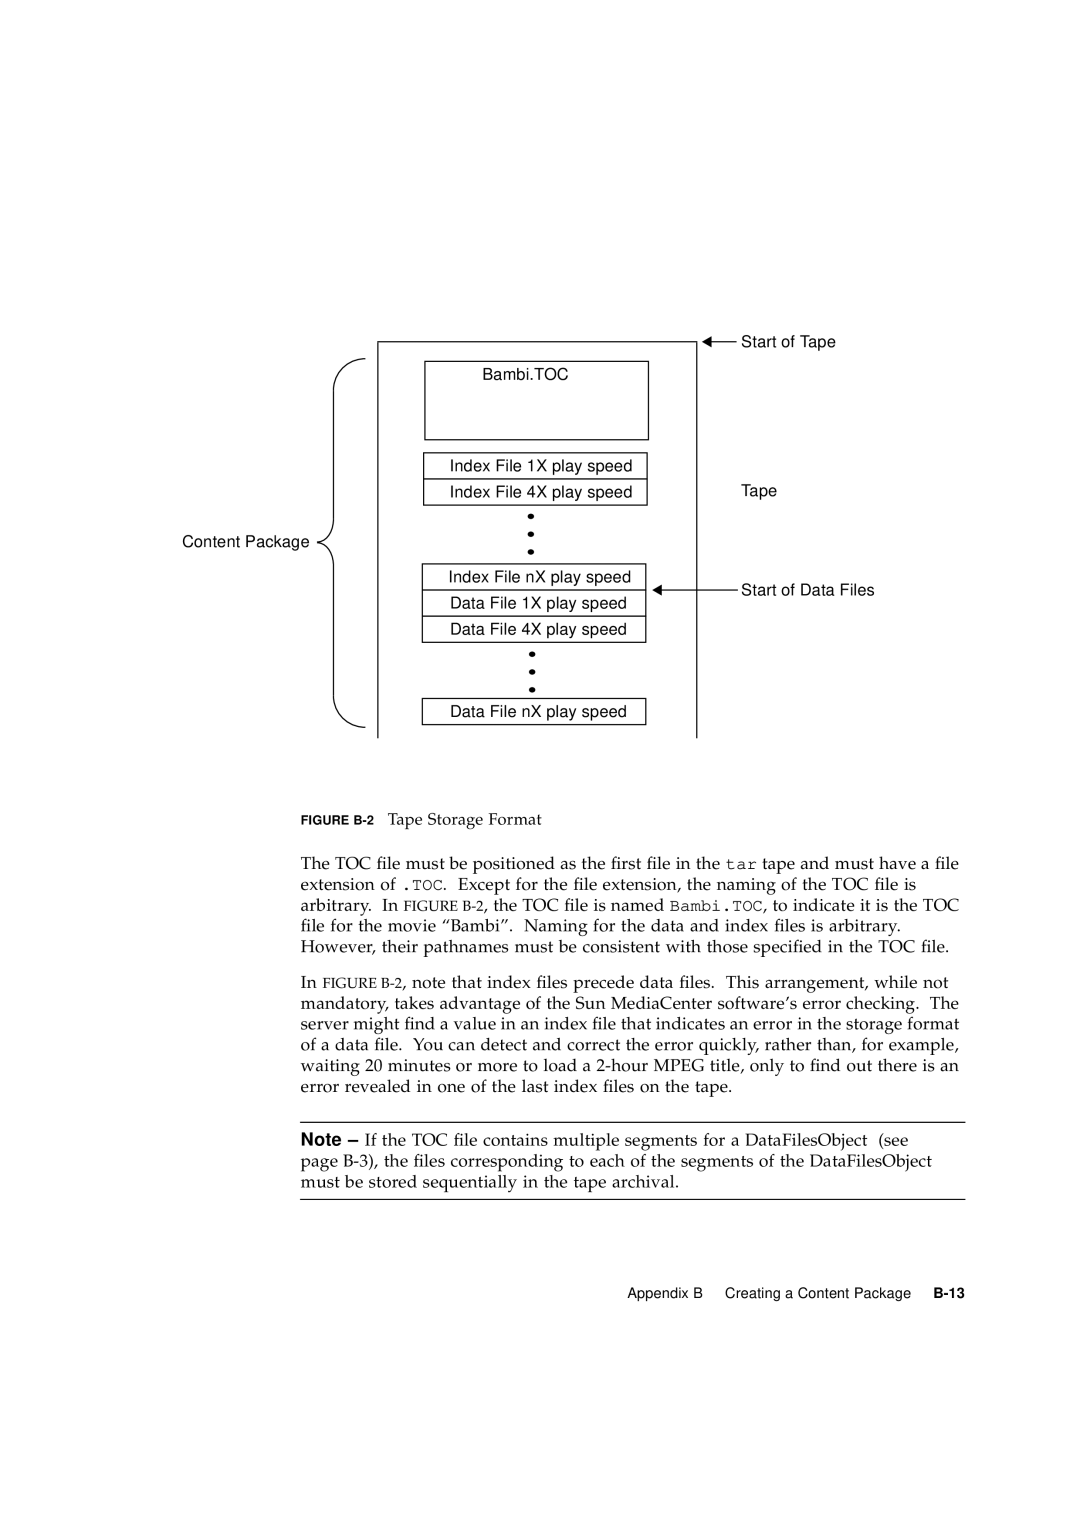 Sun Microsystems 2.1 manual FIGURE B-2 Tape Storage Format, Appendix B Creating a Content Package B-13 